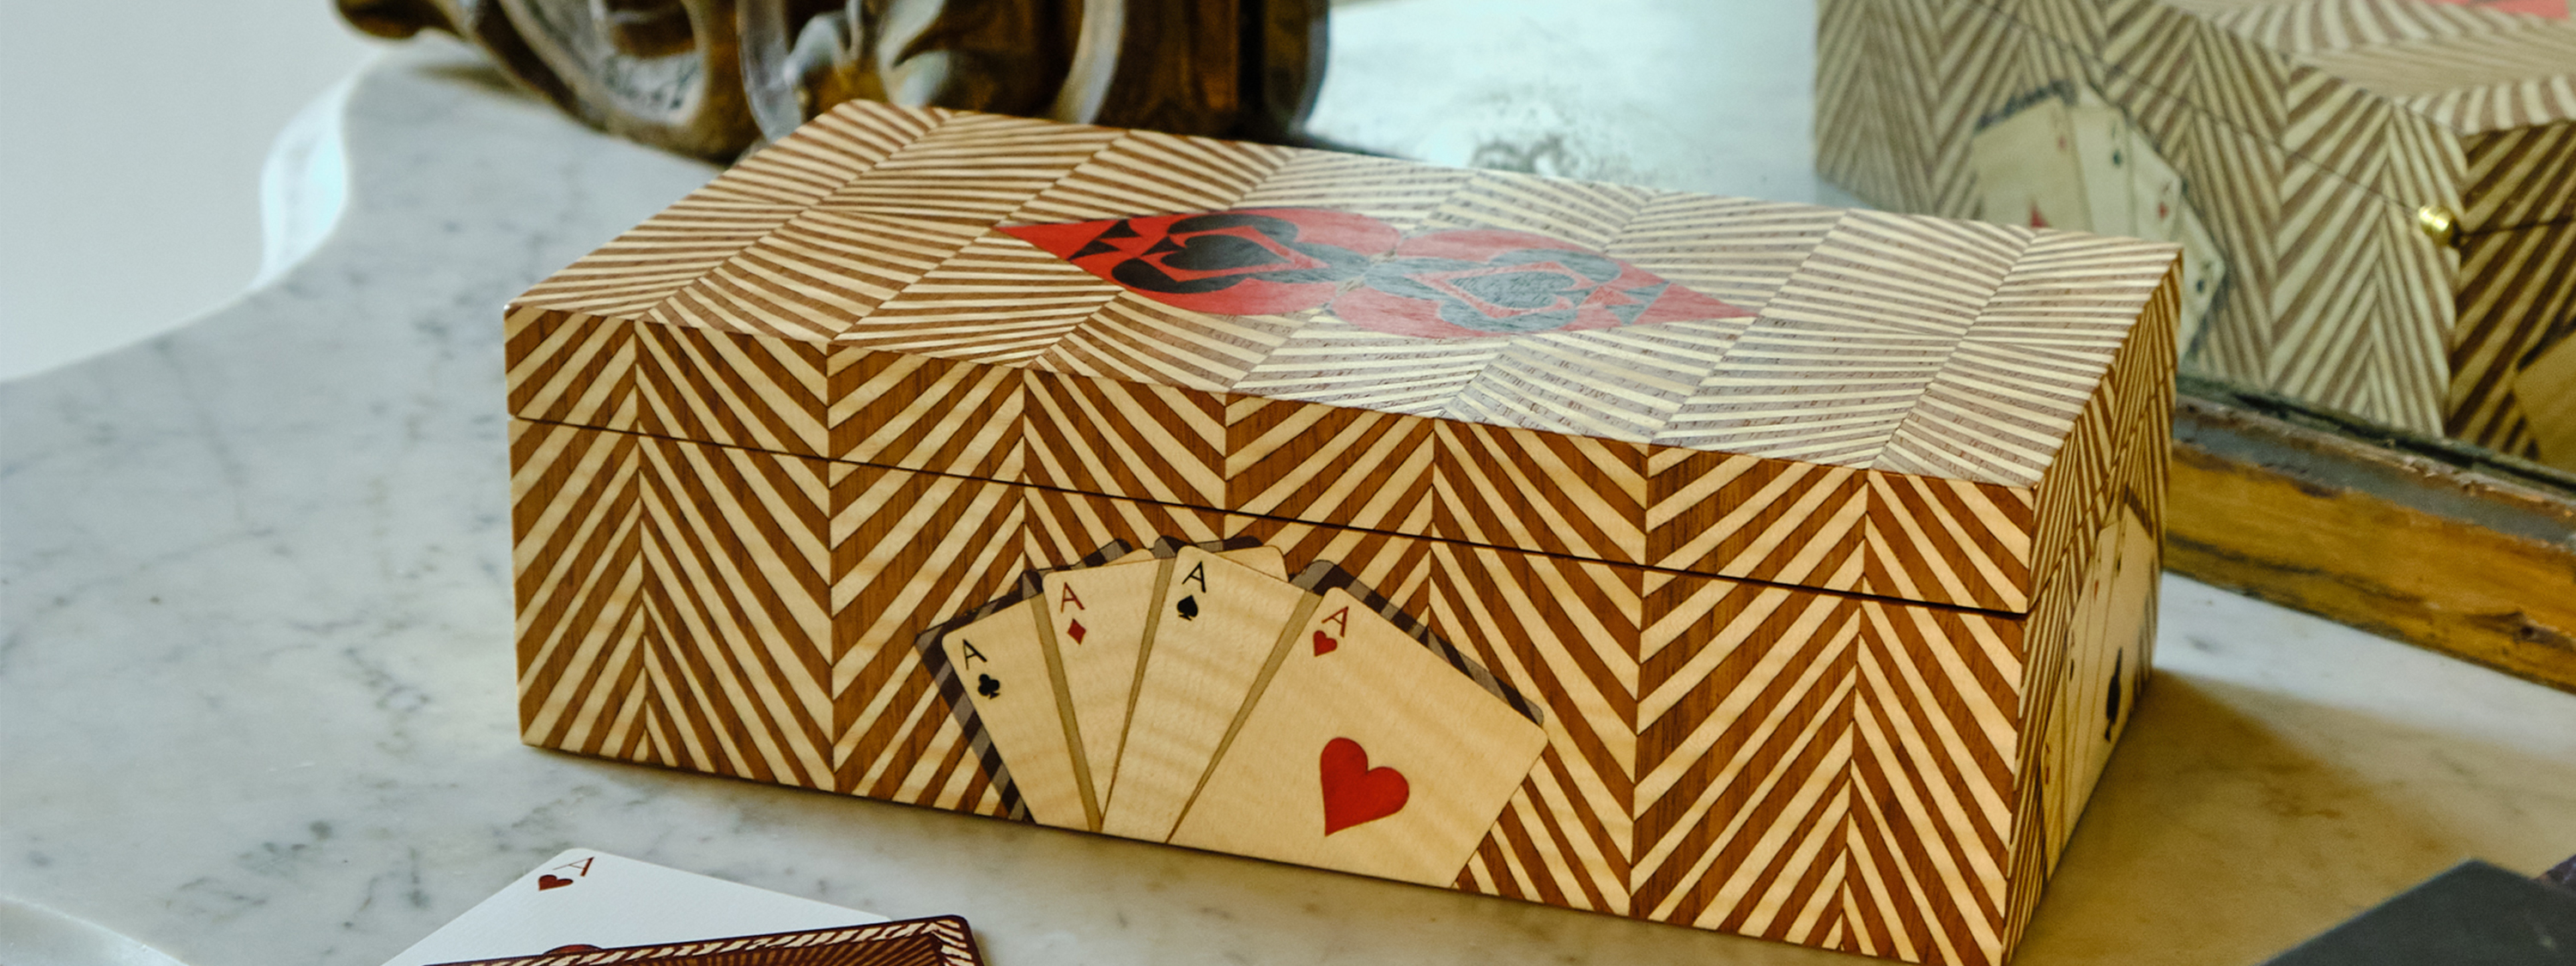 Playing Cards Boxes